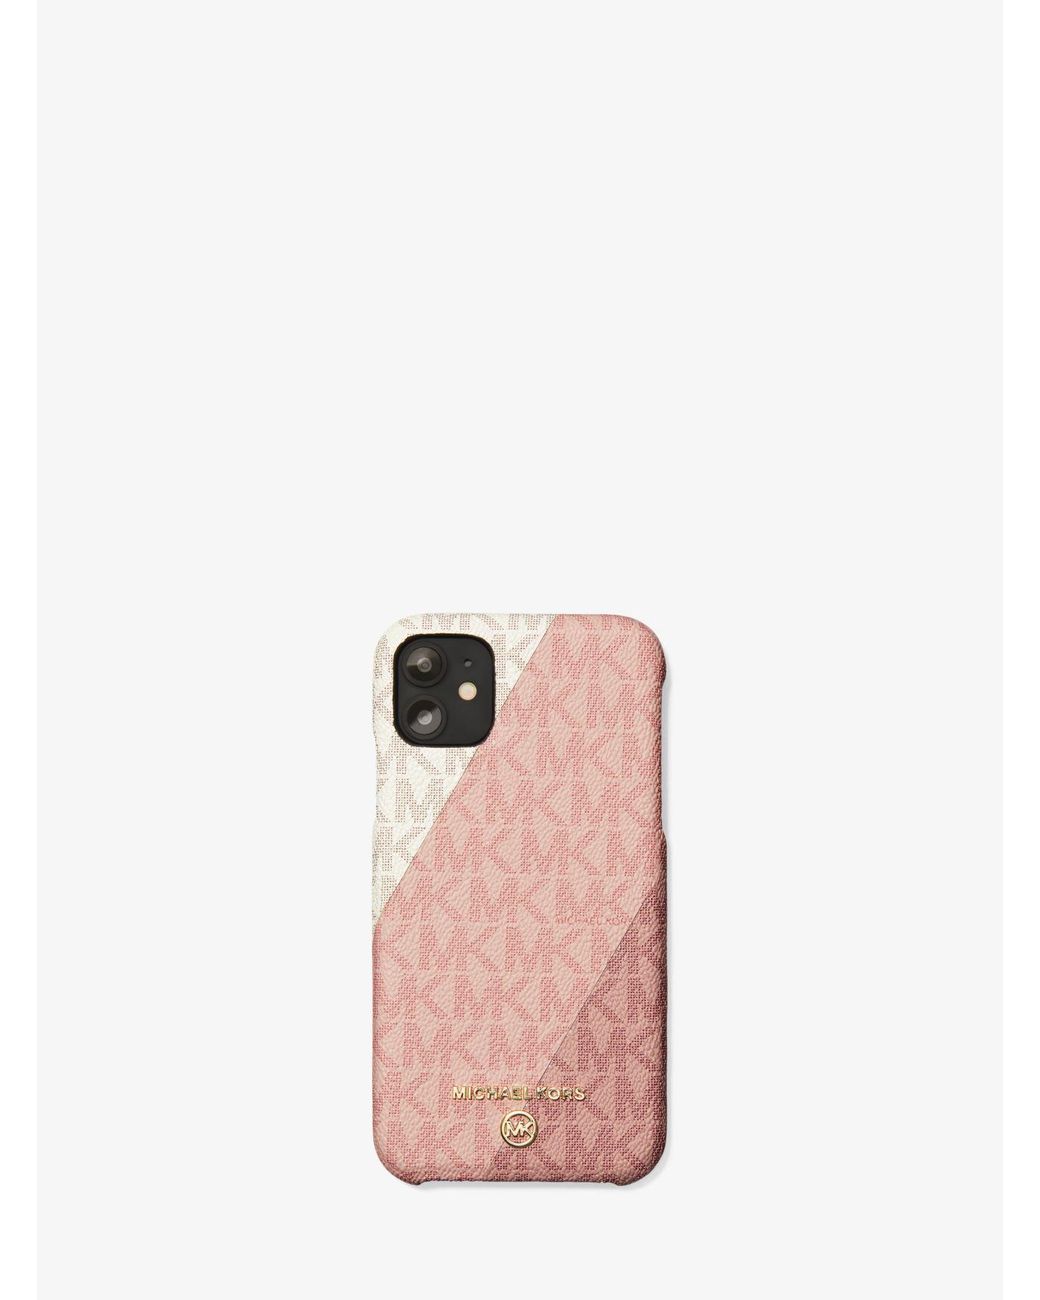 Assert Vrijlating Raad Michael Kors Color-block Logo Phone Cover For Iphone 11 in Pink | Lyst